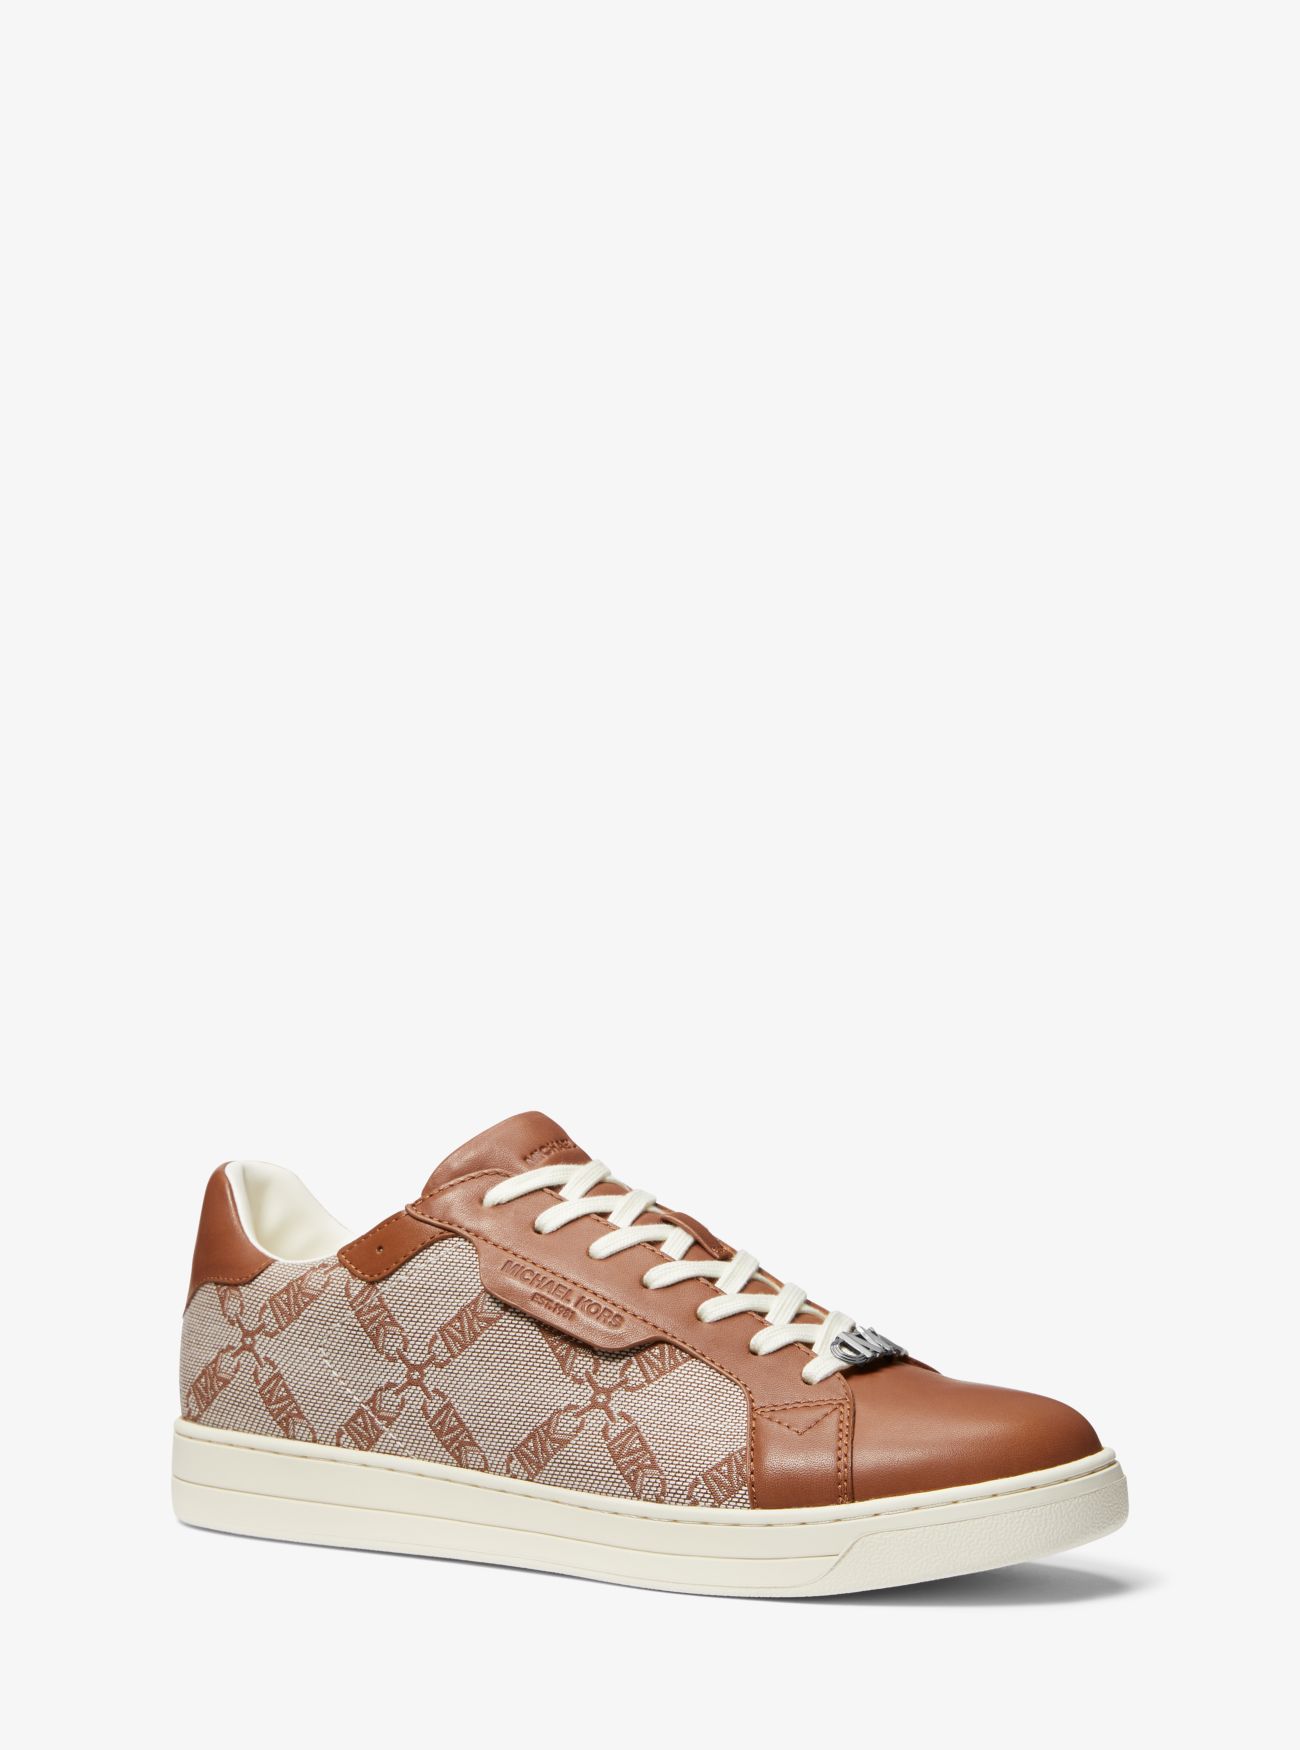 MK Keating Empire Logo Jacquard And Leather Trainers - Brown - Michael Kors